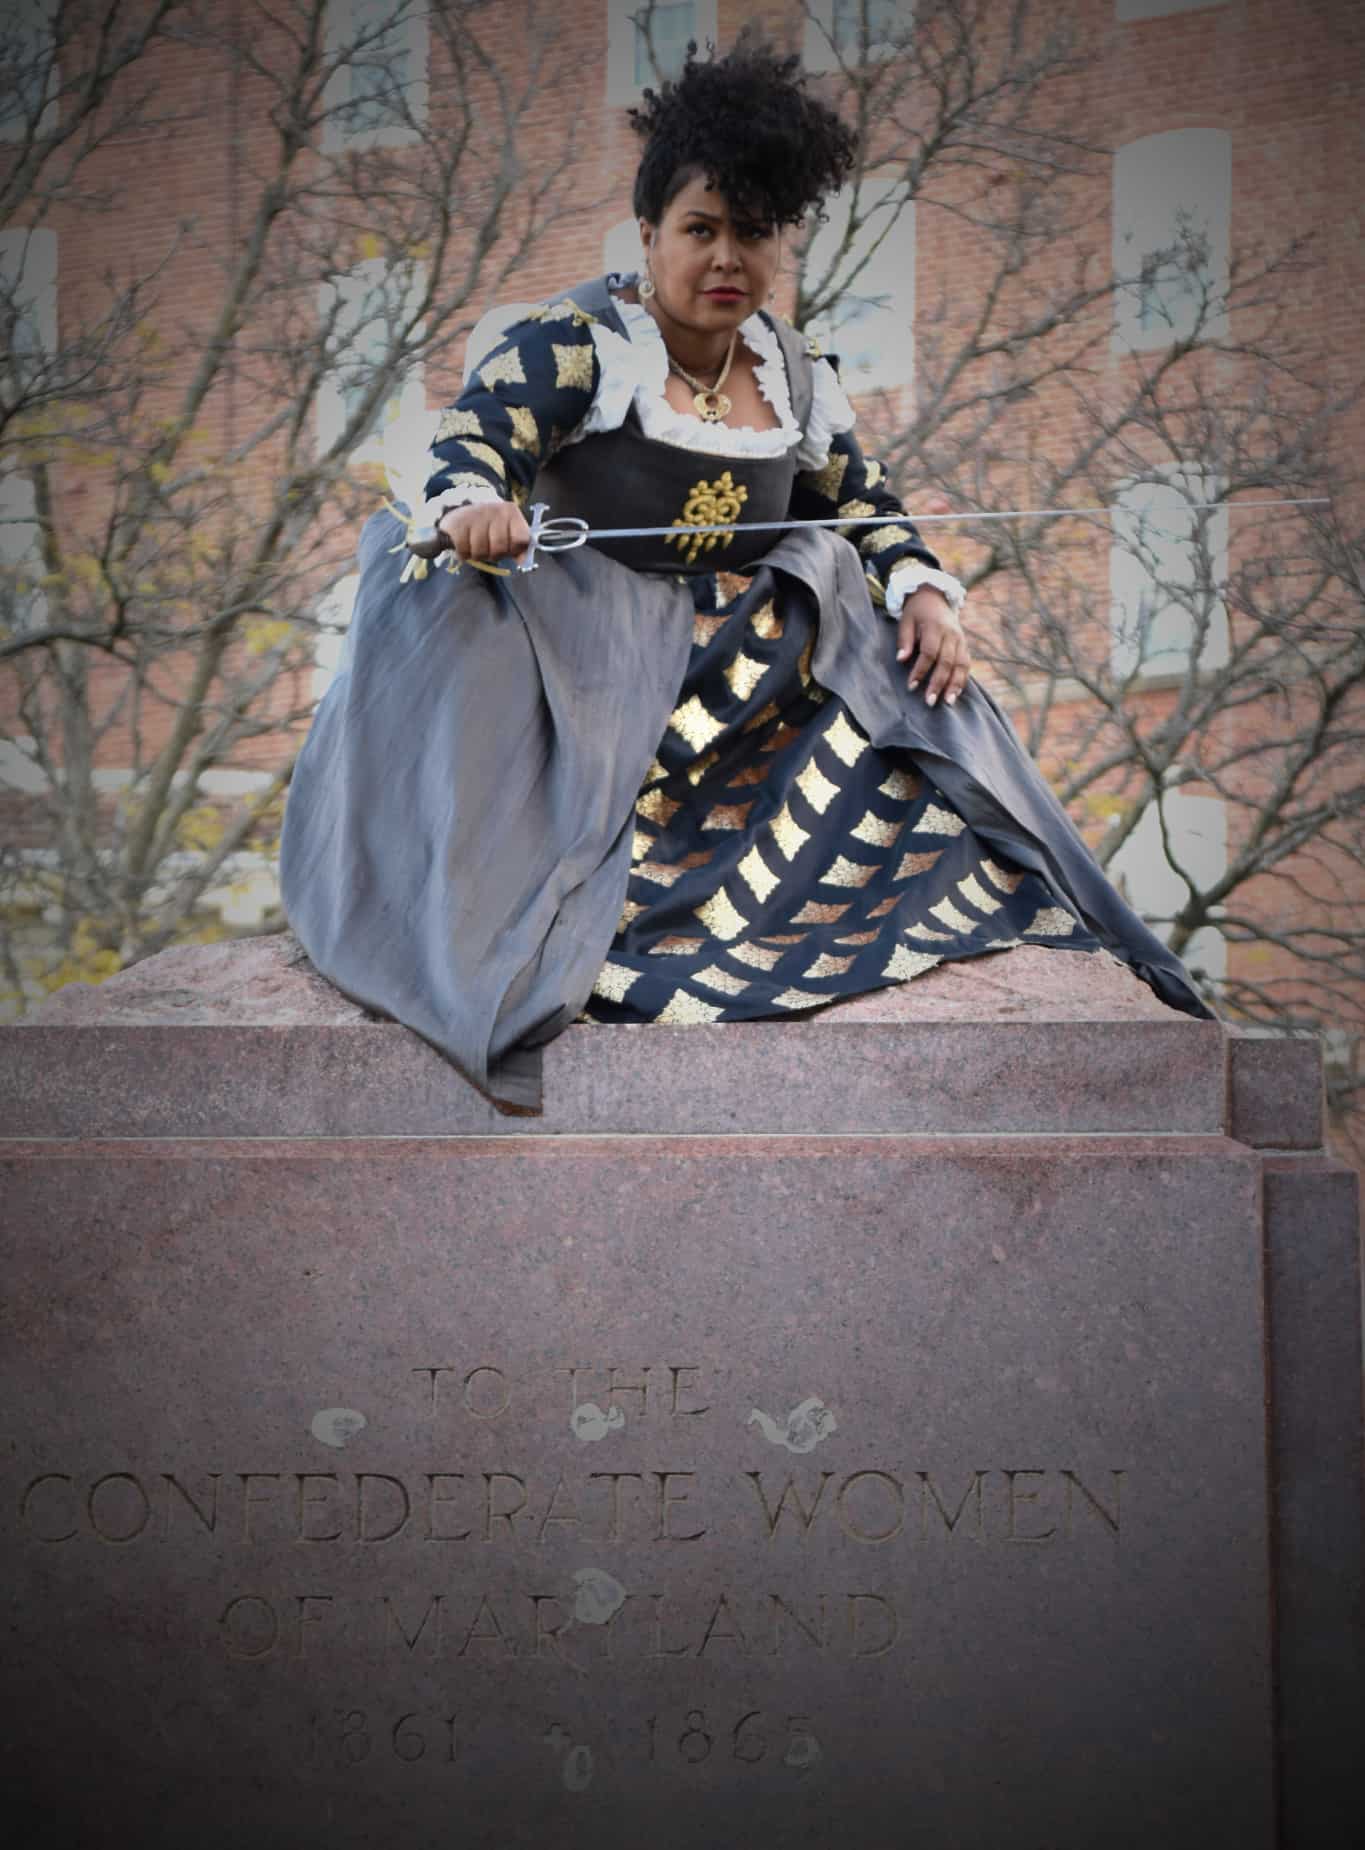 Tamieka Chavis at former Confederate Women’s Monument in Baltimore, Maryland.